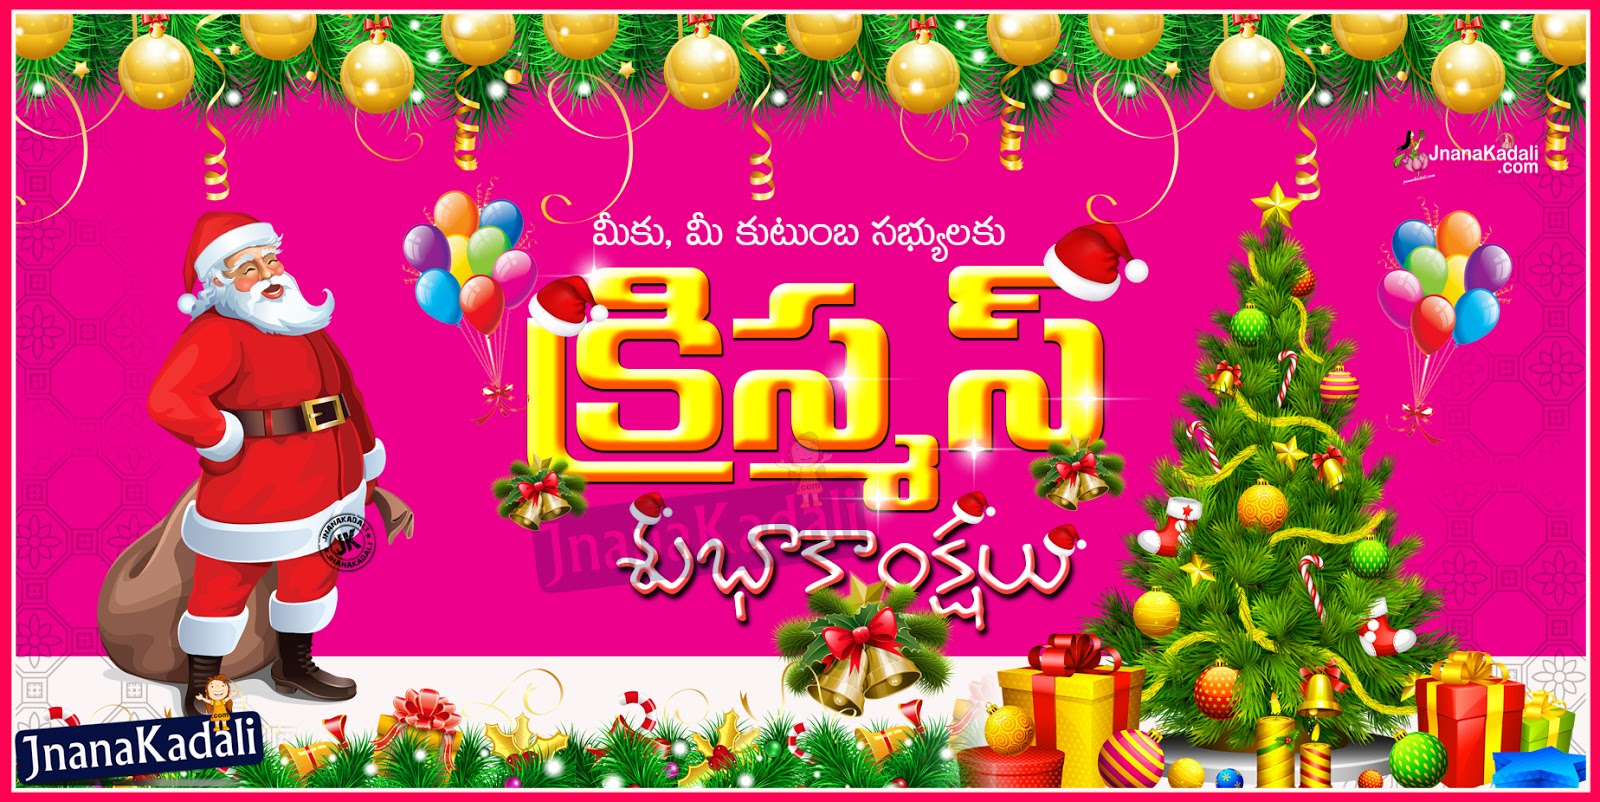 Here is Happy Christmas Telugu sms messages for whatsapp Best christmas greetings in telugu